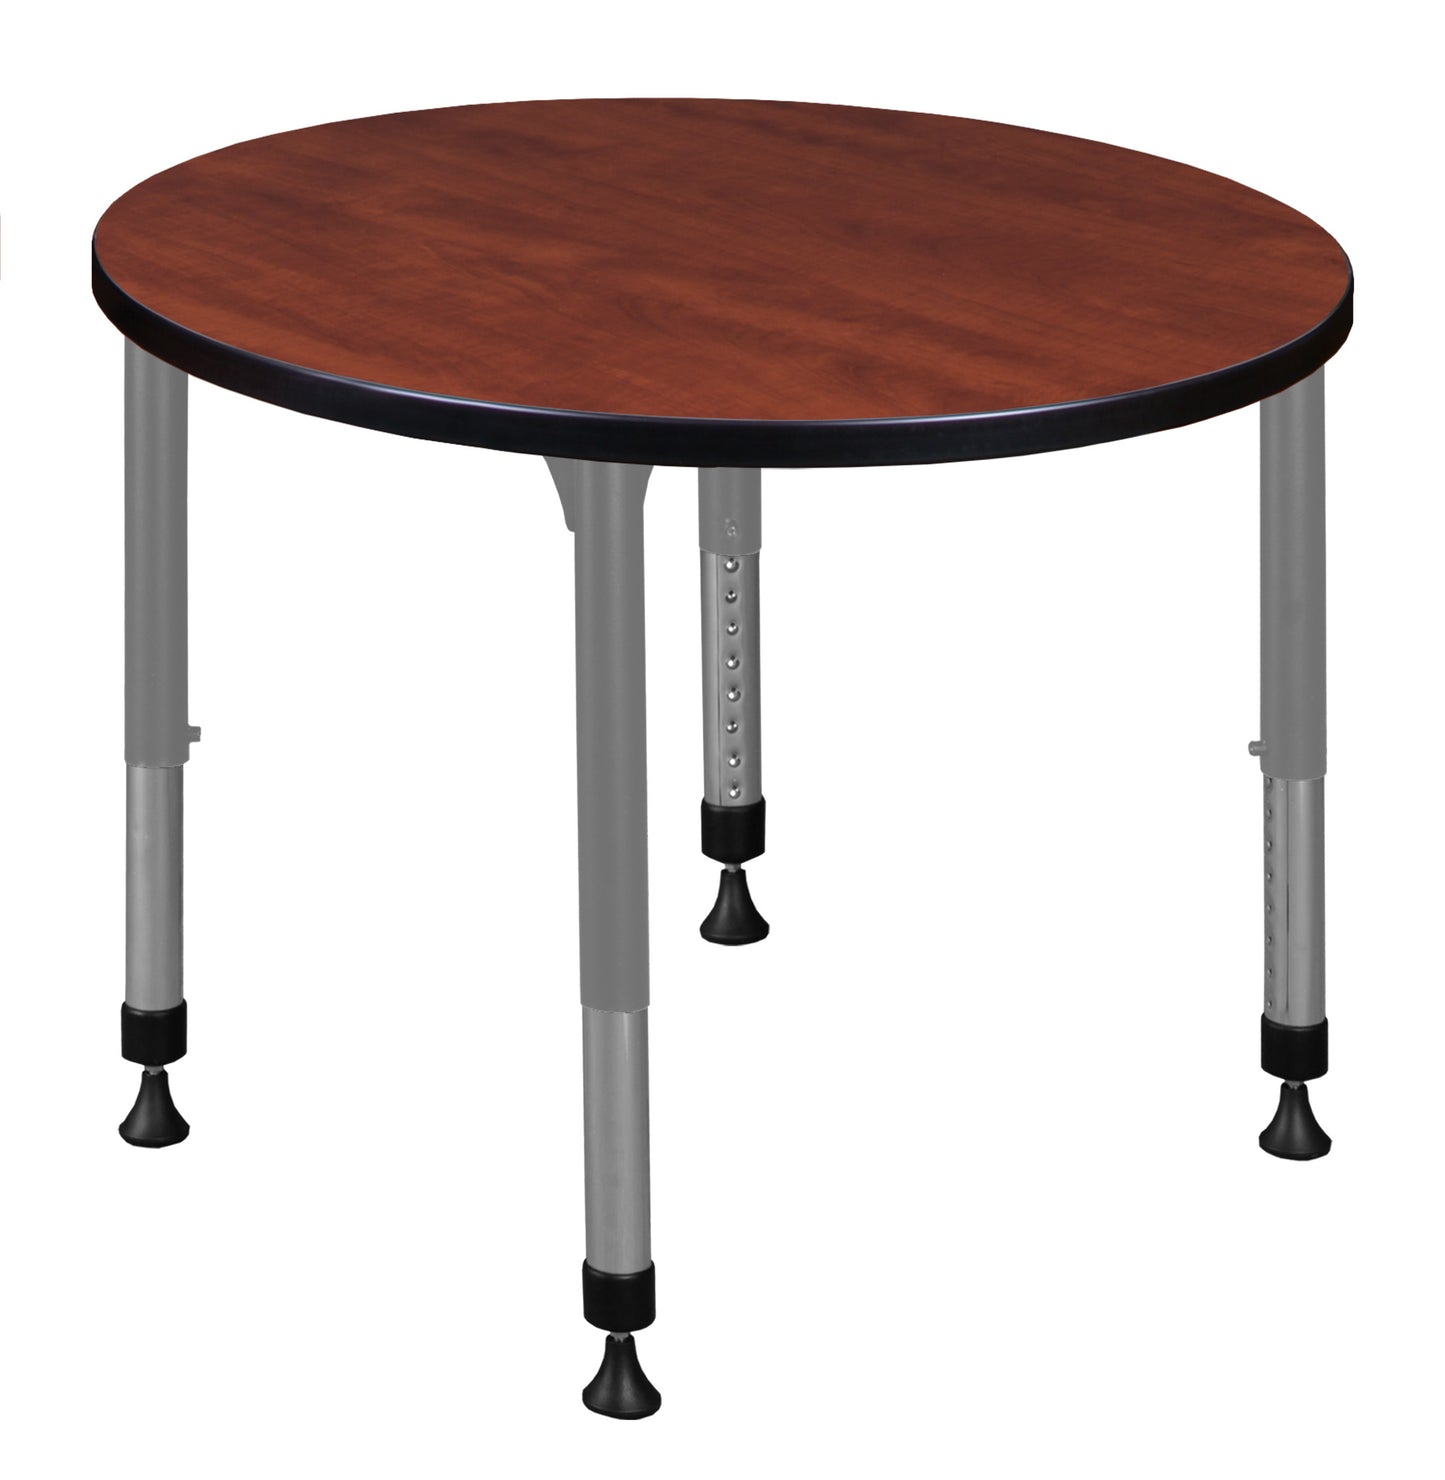 Regency Kee 30 in. Round Height Adjustable Mobile Classroom Activity Table